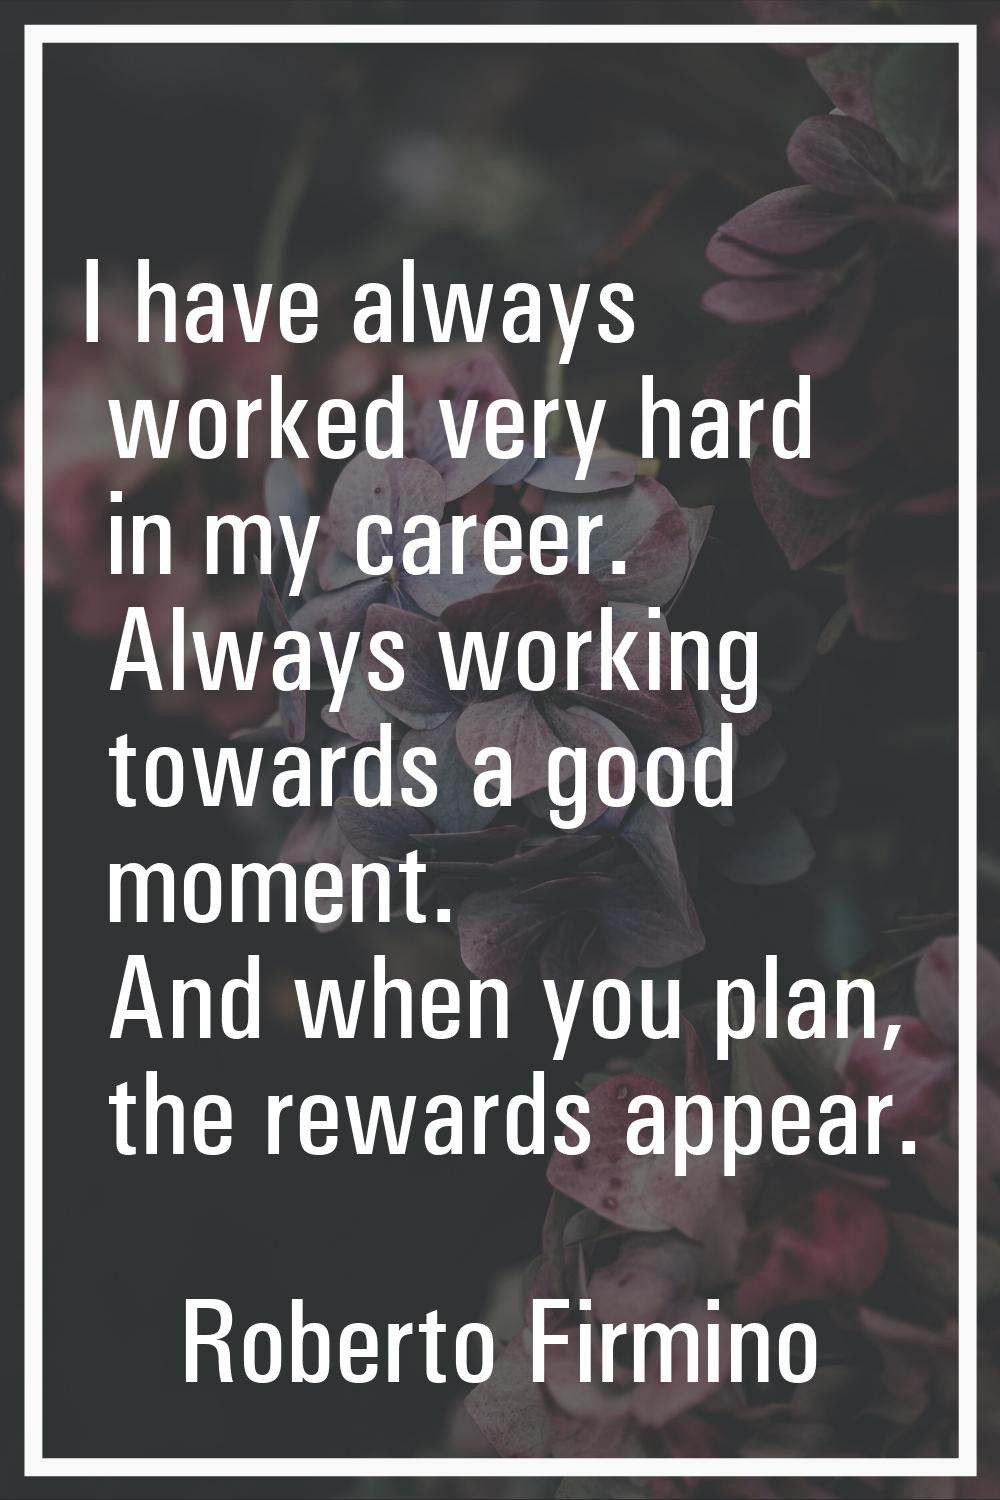 I have always worked very hard in my career. Always working towards a good moment. And when you pla